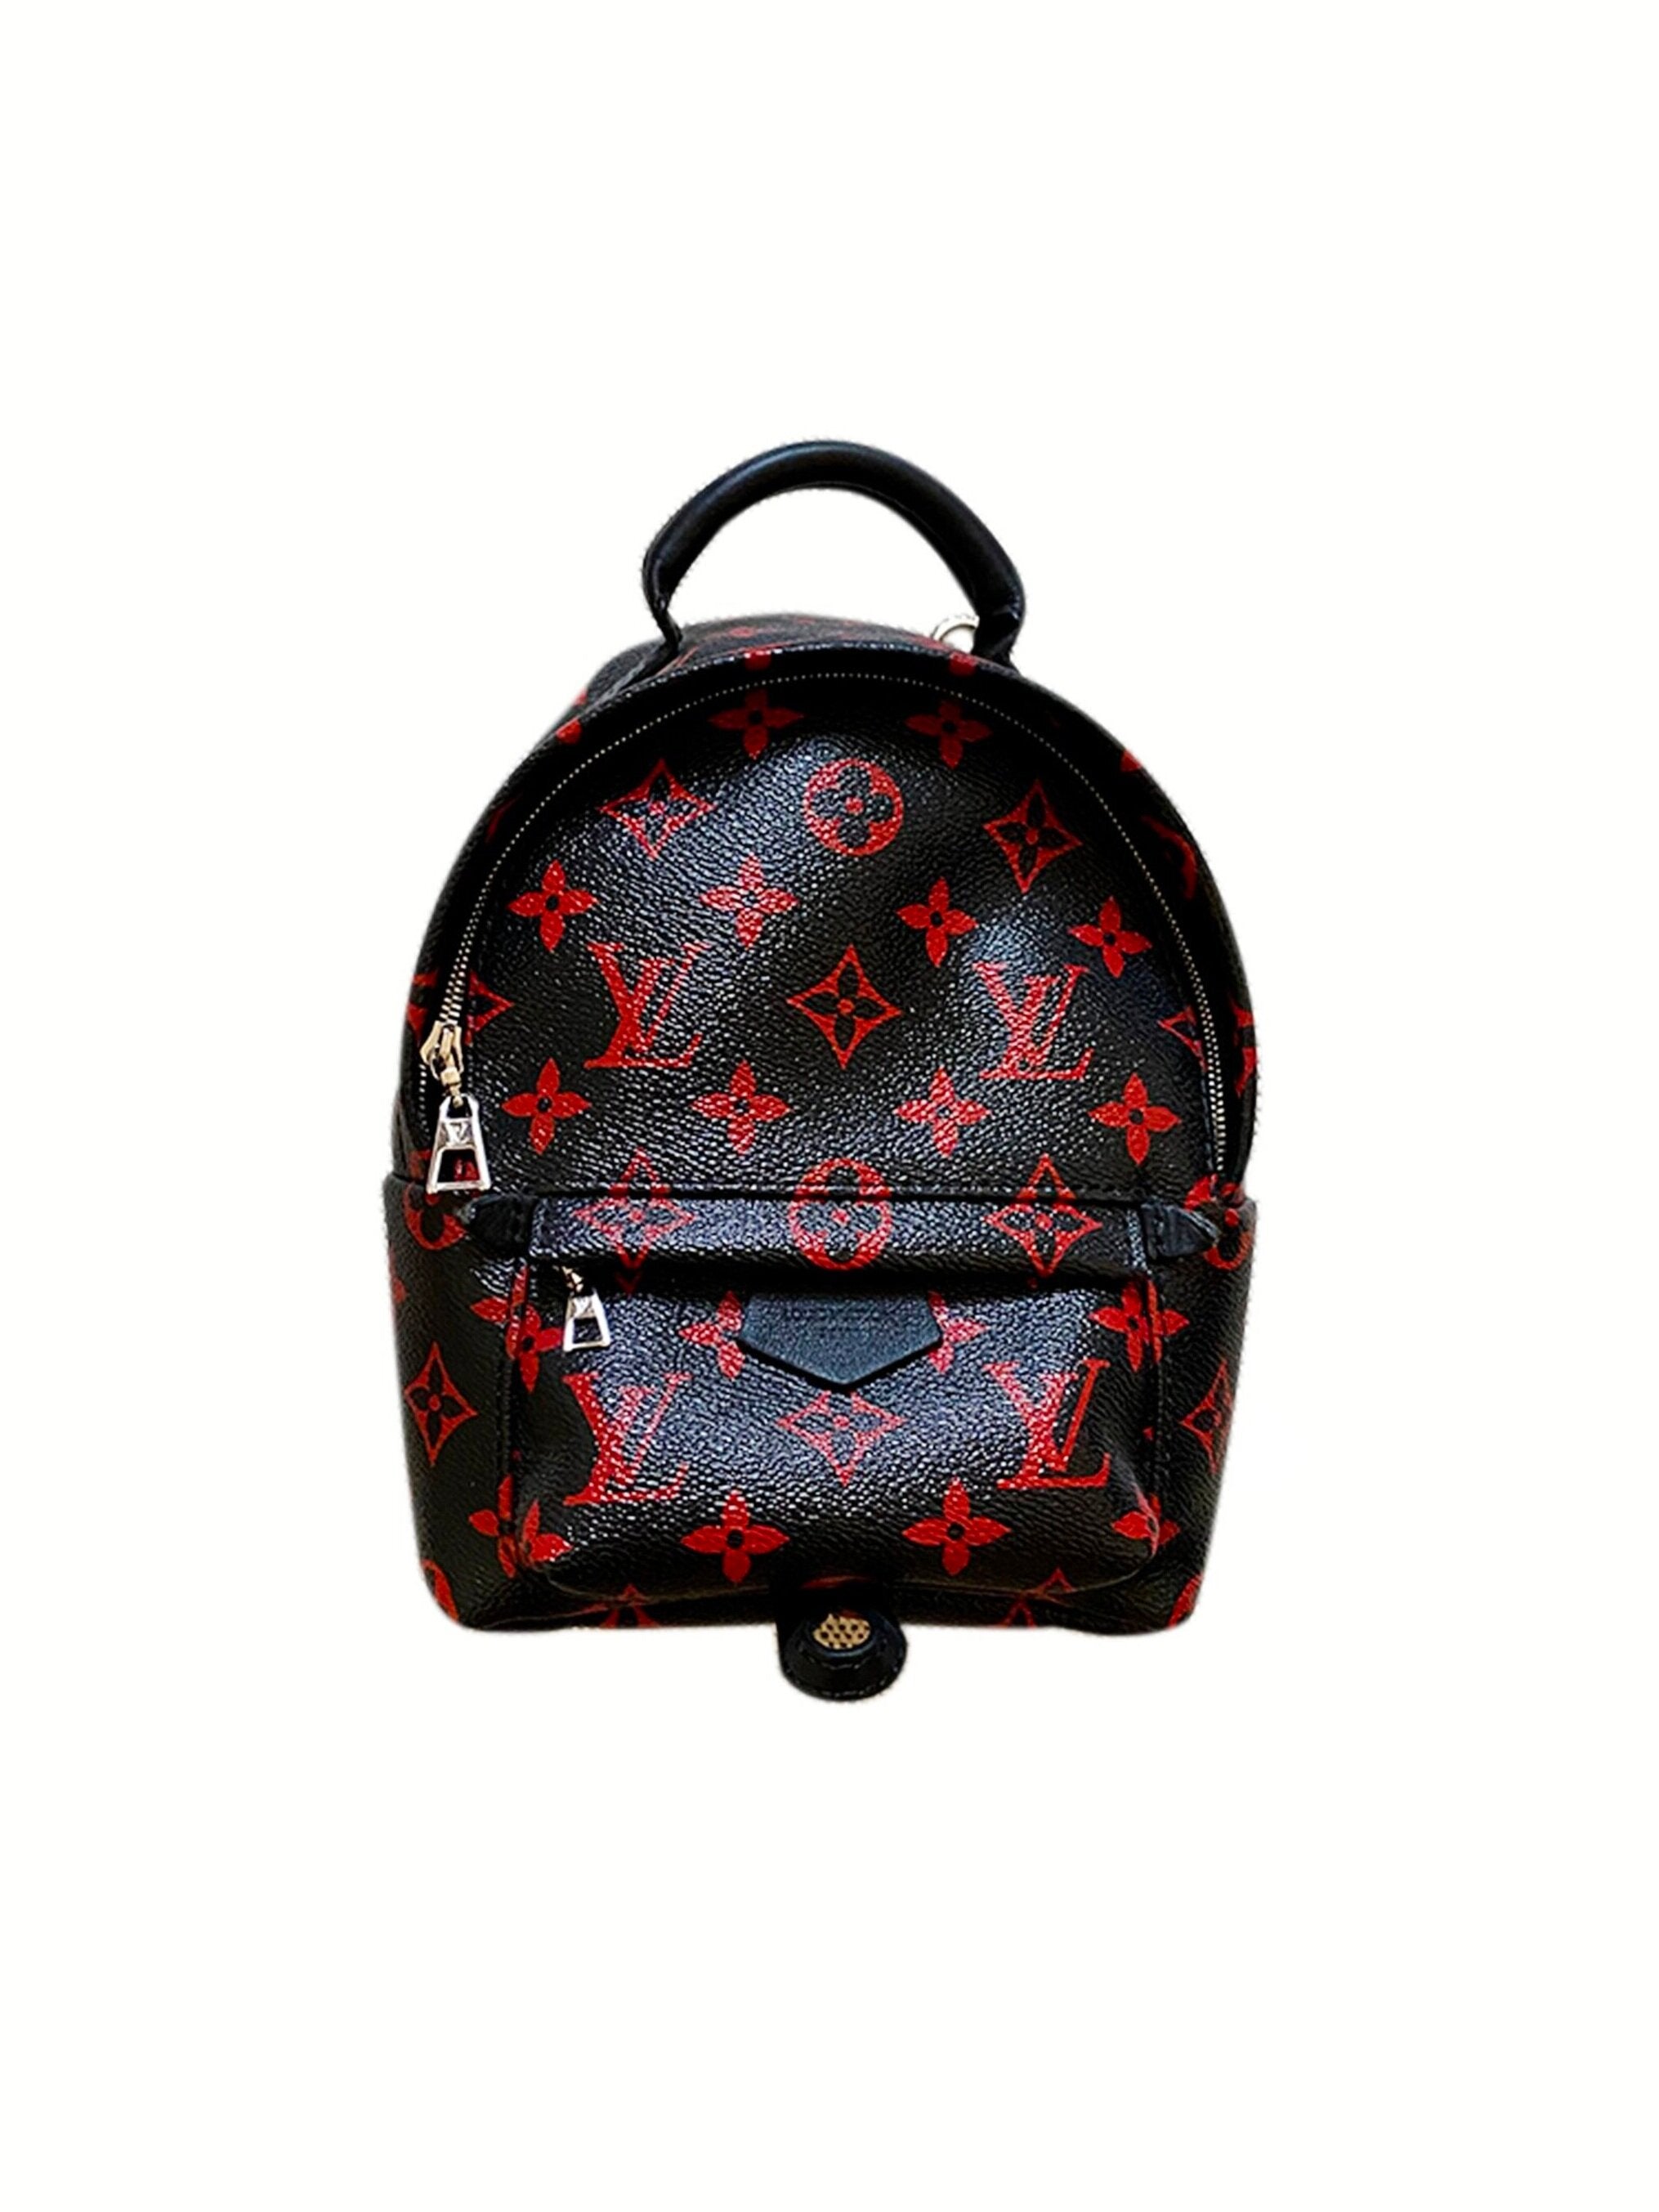 Palm springs leather backpack Louis Vuitton Black in Leather  23386807